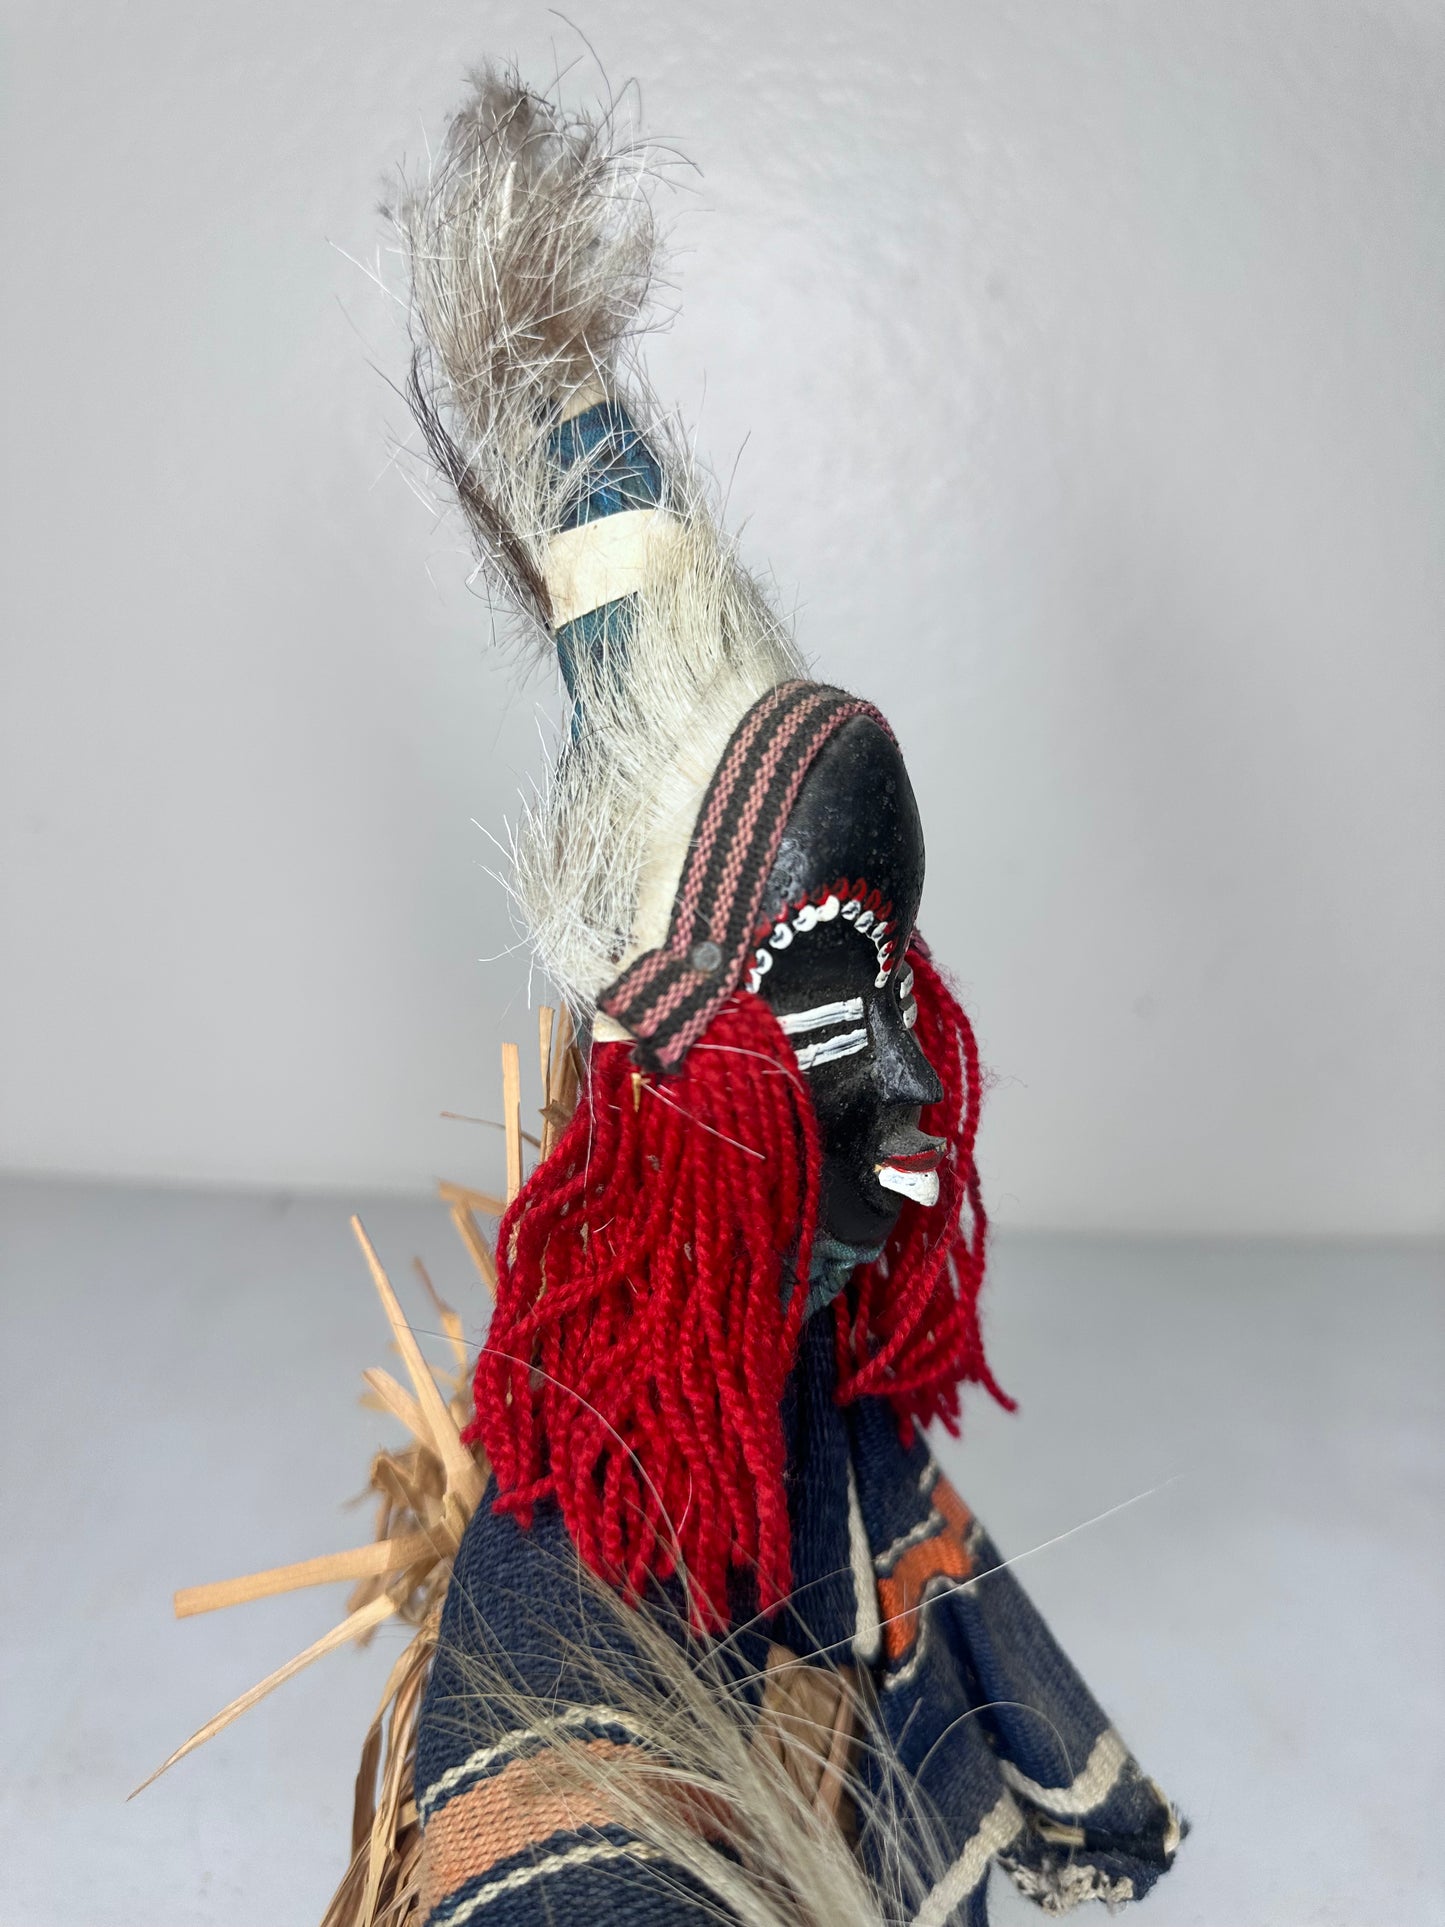 Handmade African Tribal Shaman Doll Sculpture - Authentic Cultural Collectible